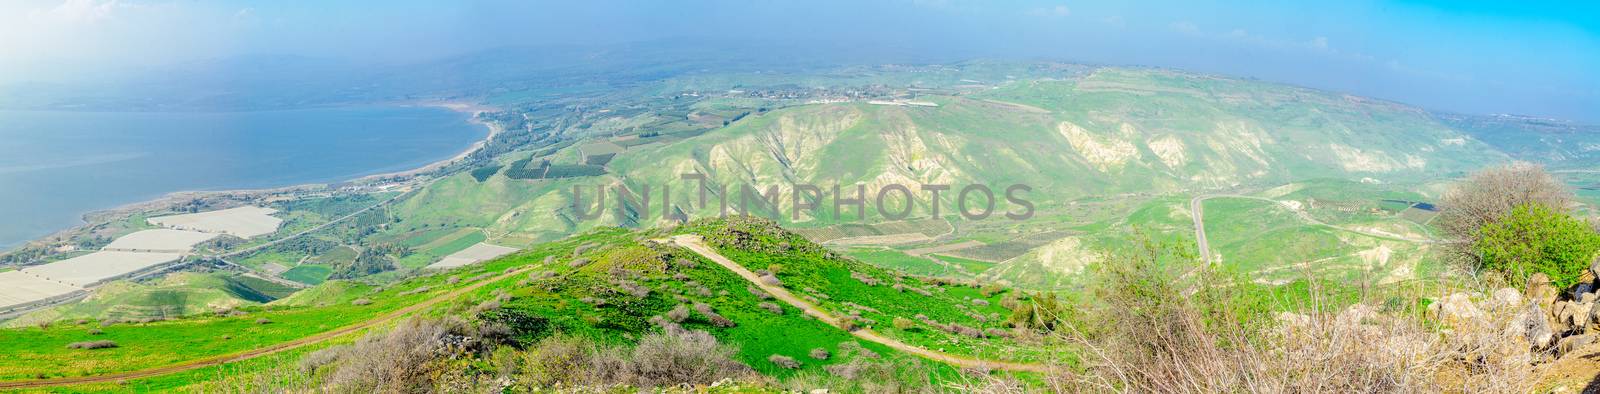 Panoramic view of the Golan Heights and the northern part of the Sea of Galilee, Northern Israel